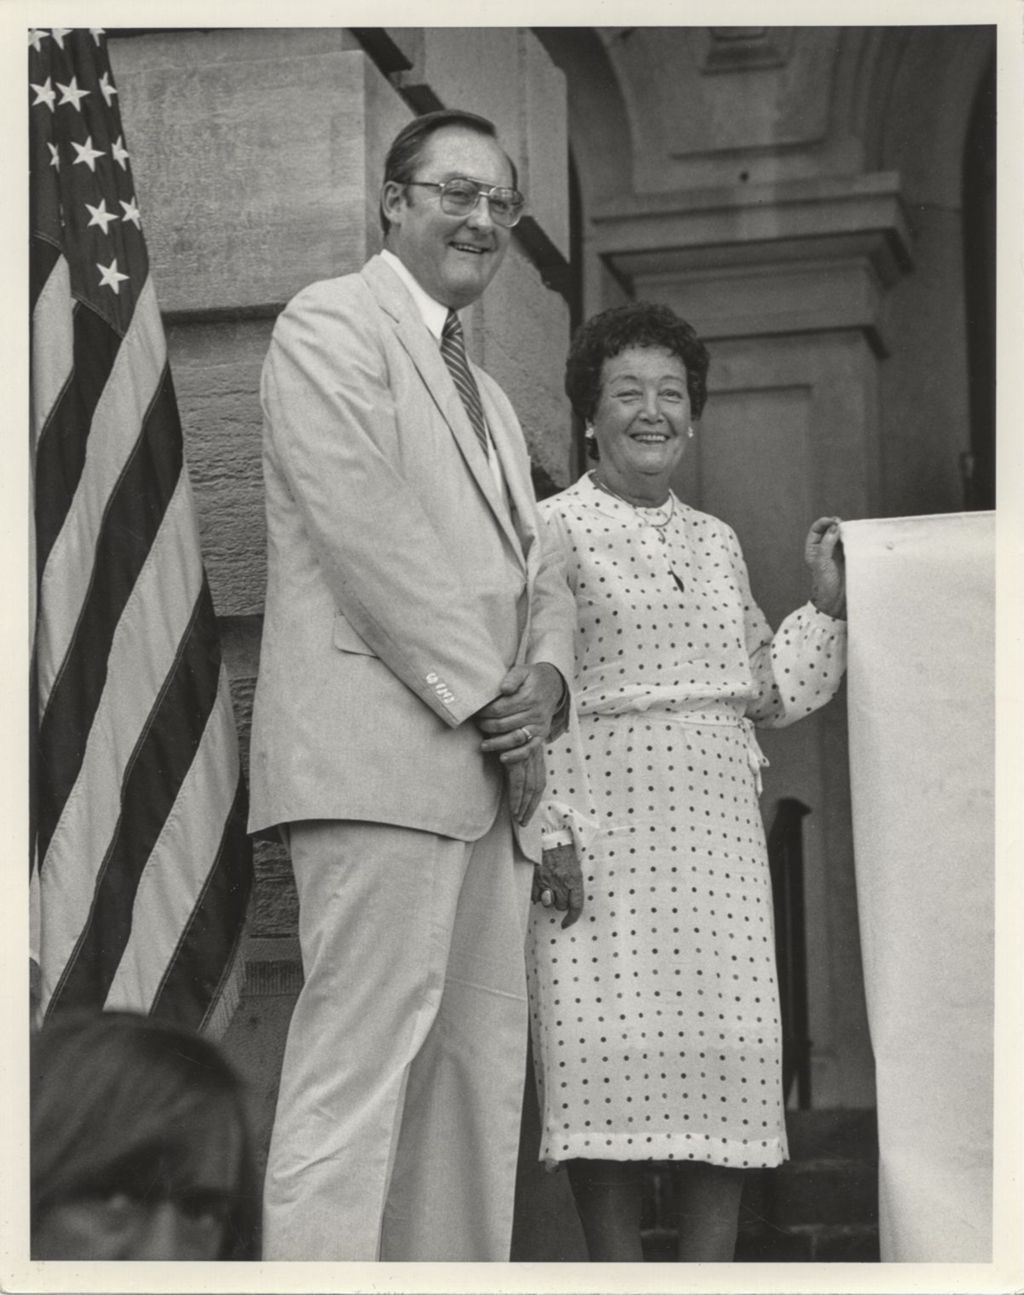 Governor Jim Thompson with Eleanor Daley